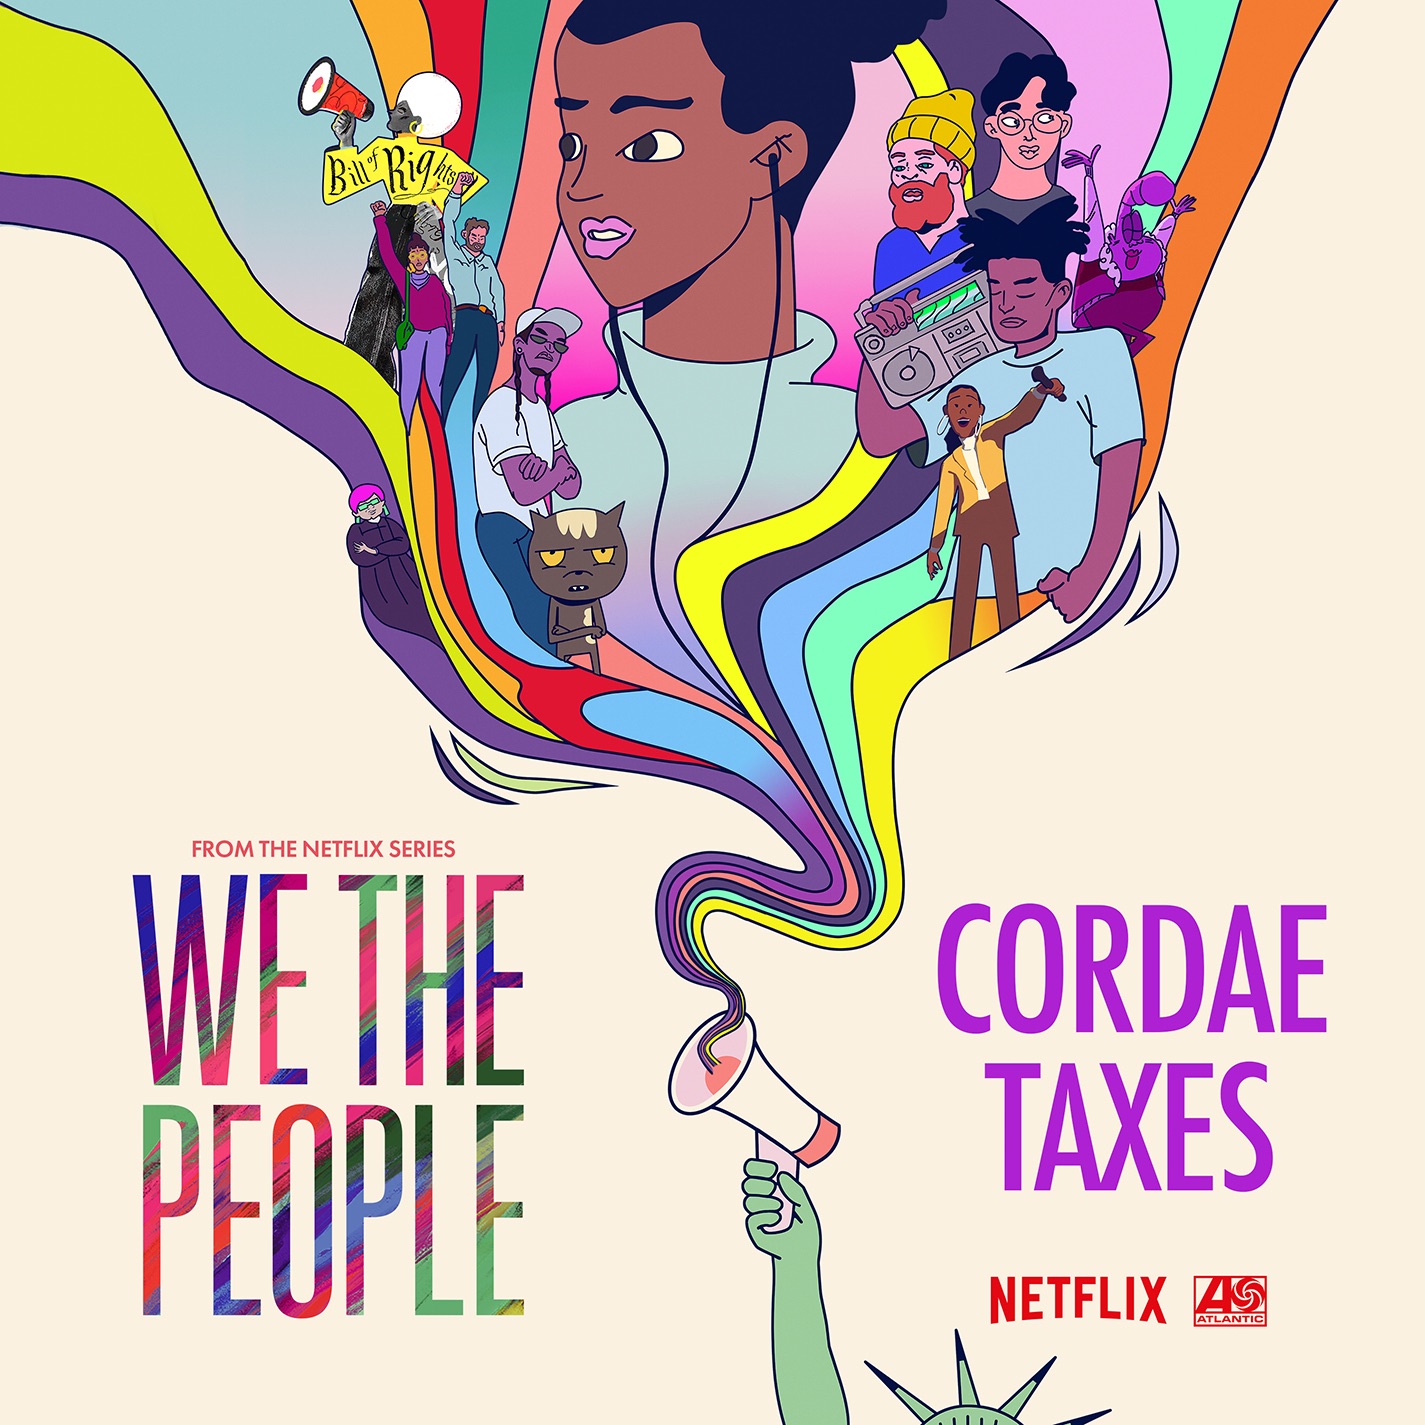 Cordae - Taxes (from the Netflix Series "We The People") - Single